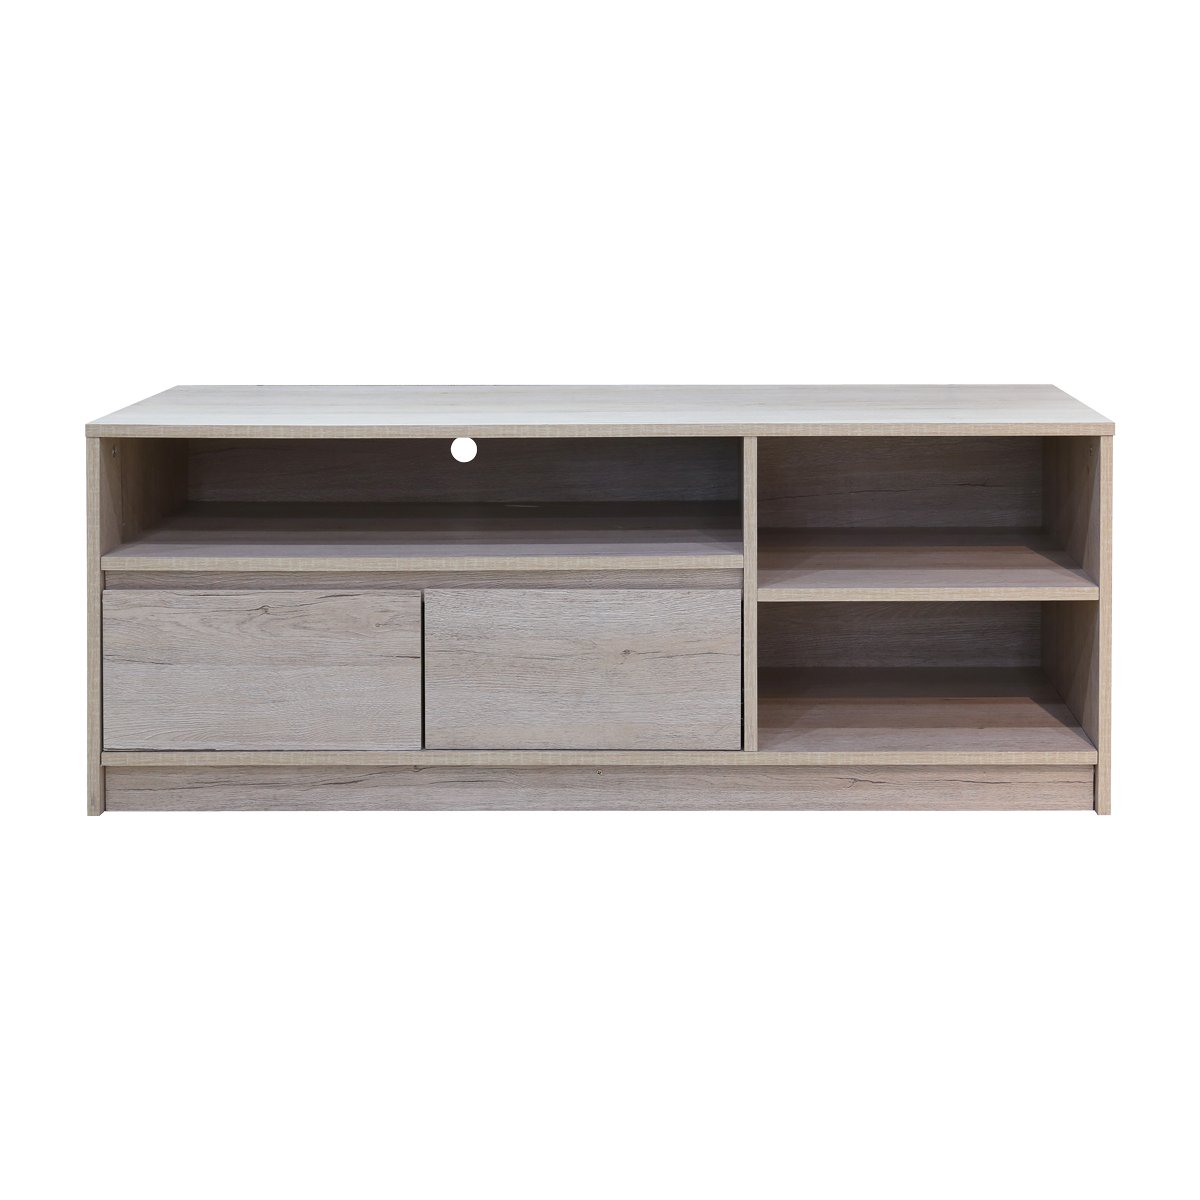 DH TV CABINET